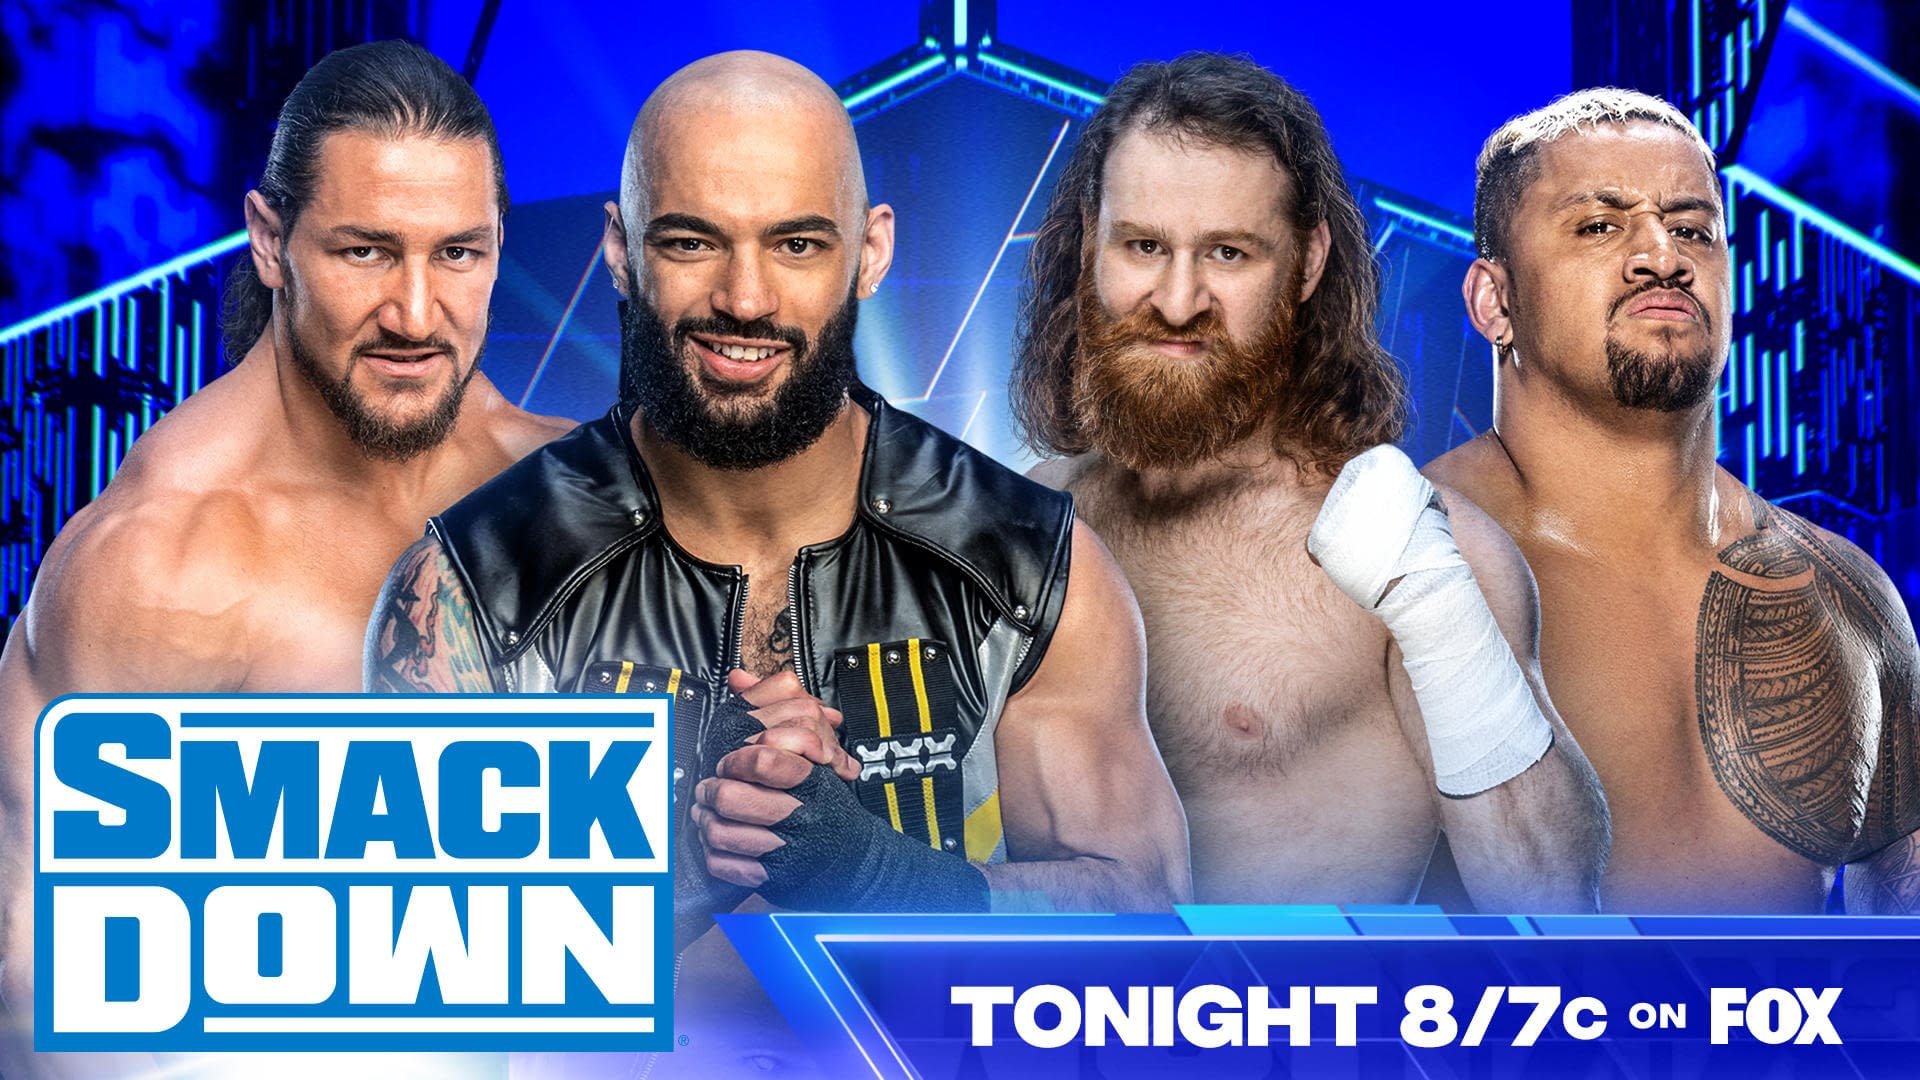 WWE SmackDown Preview 9 30: Sami Zayn & Solo Sikoa In Tag Action